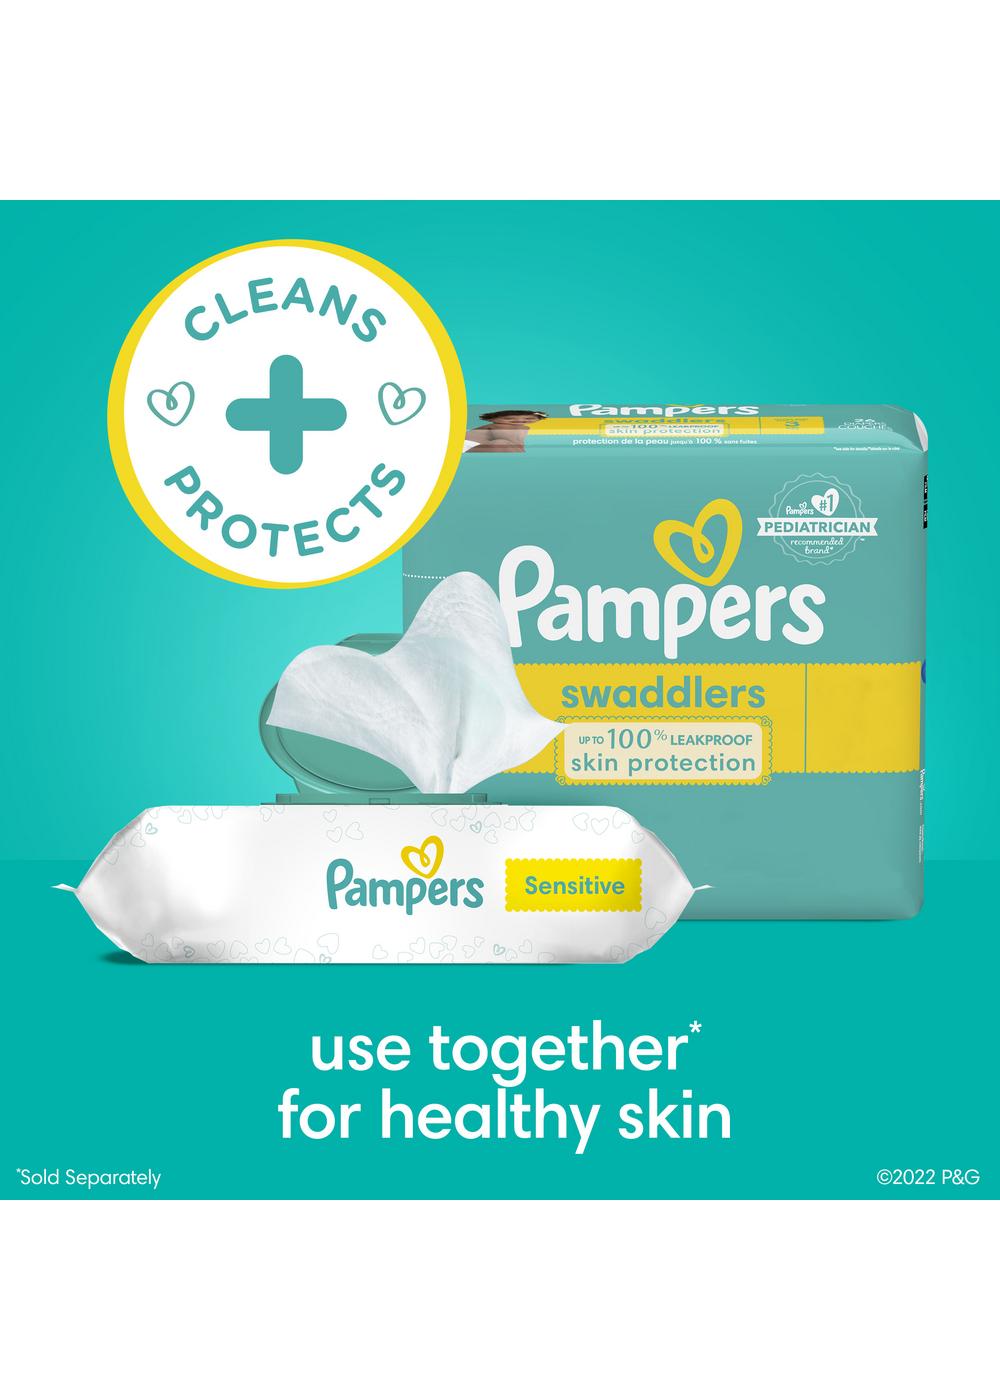 Pampers Sensitive Skin & Fragrance Free Baby Wipes 12 Pk; image 8 of 10